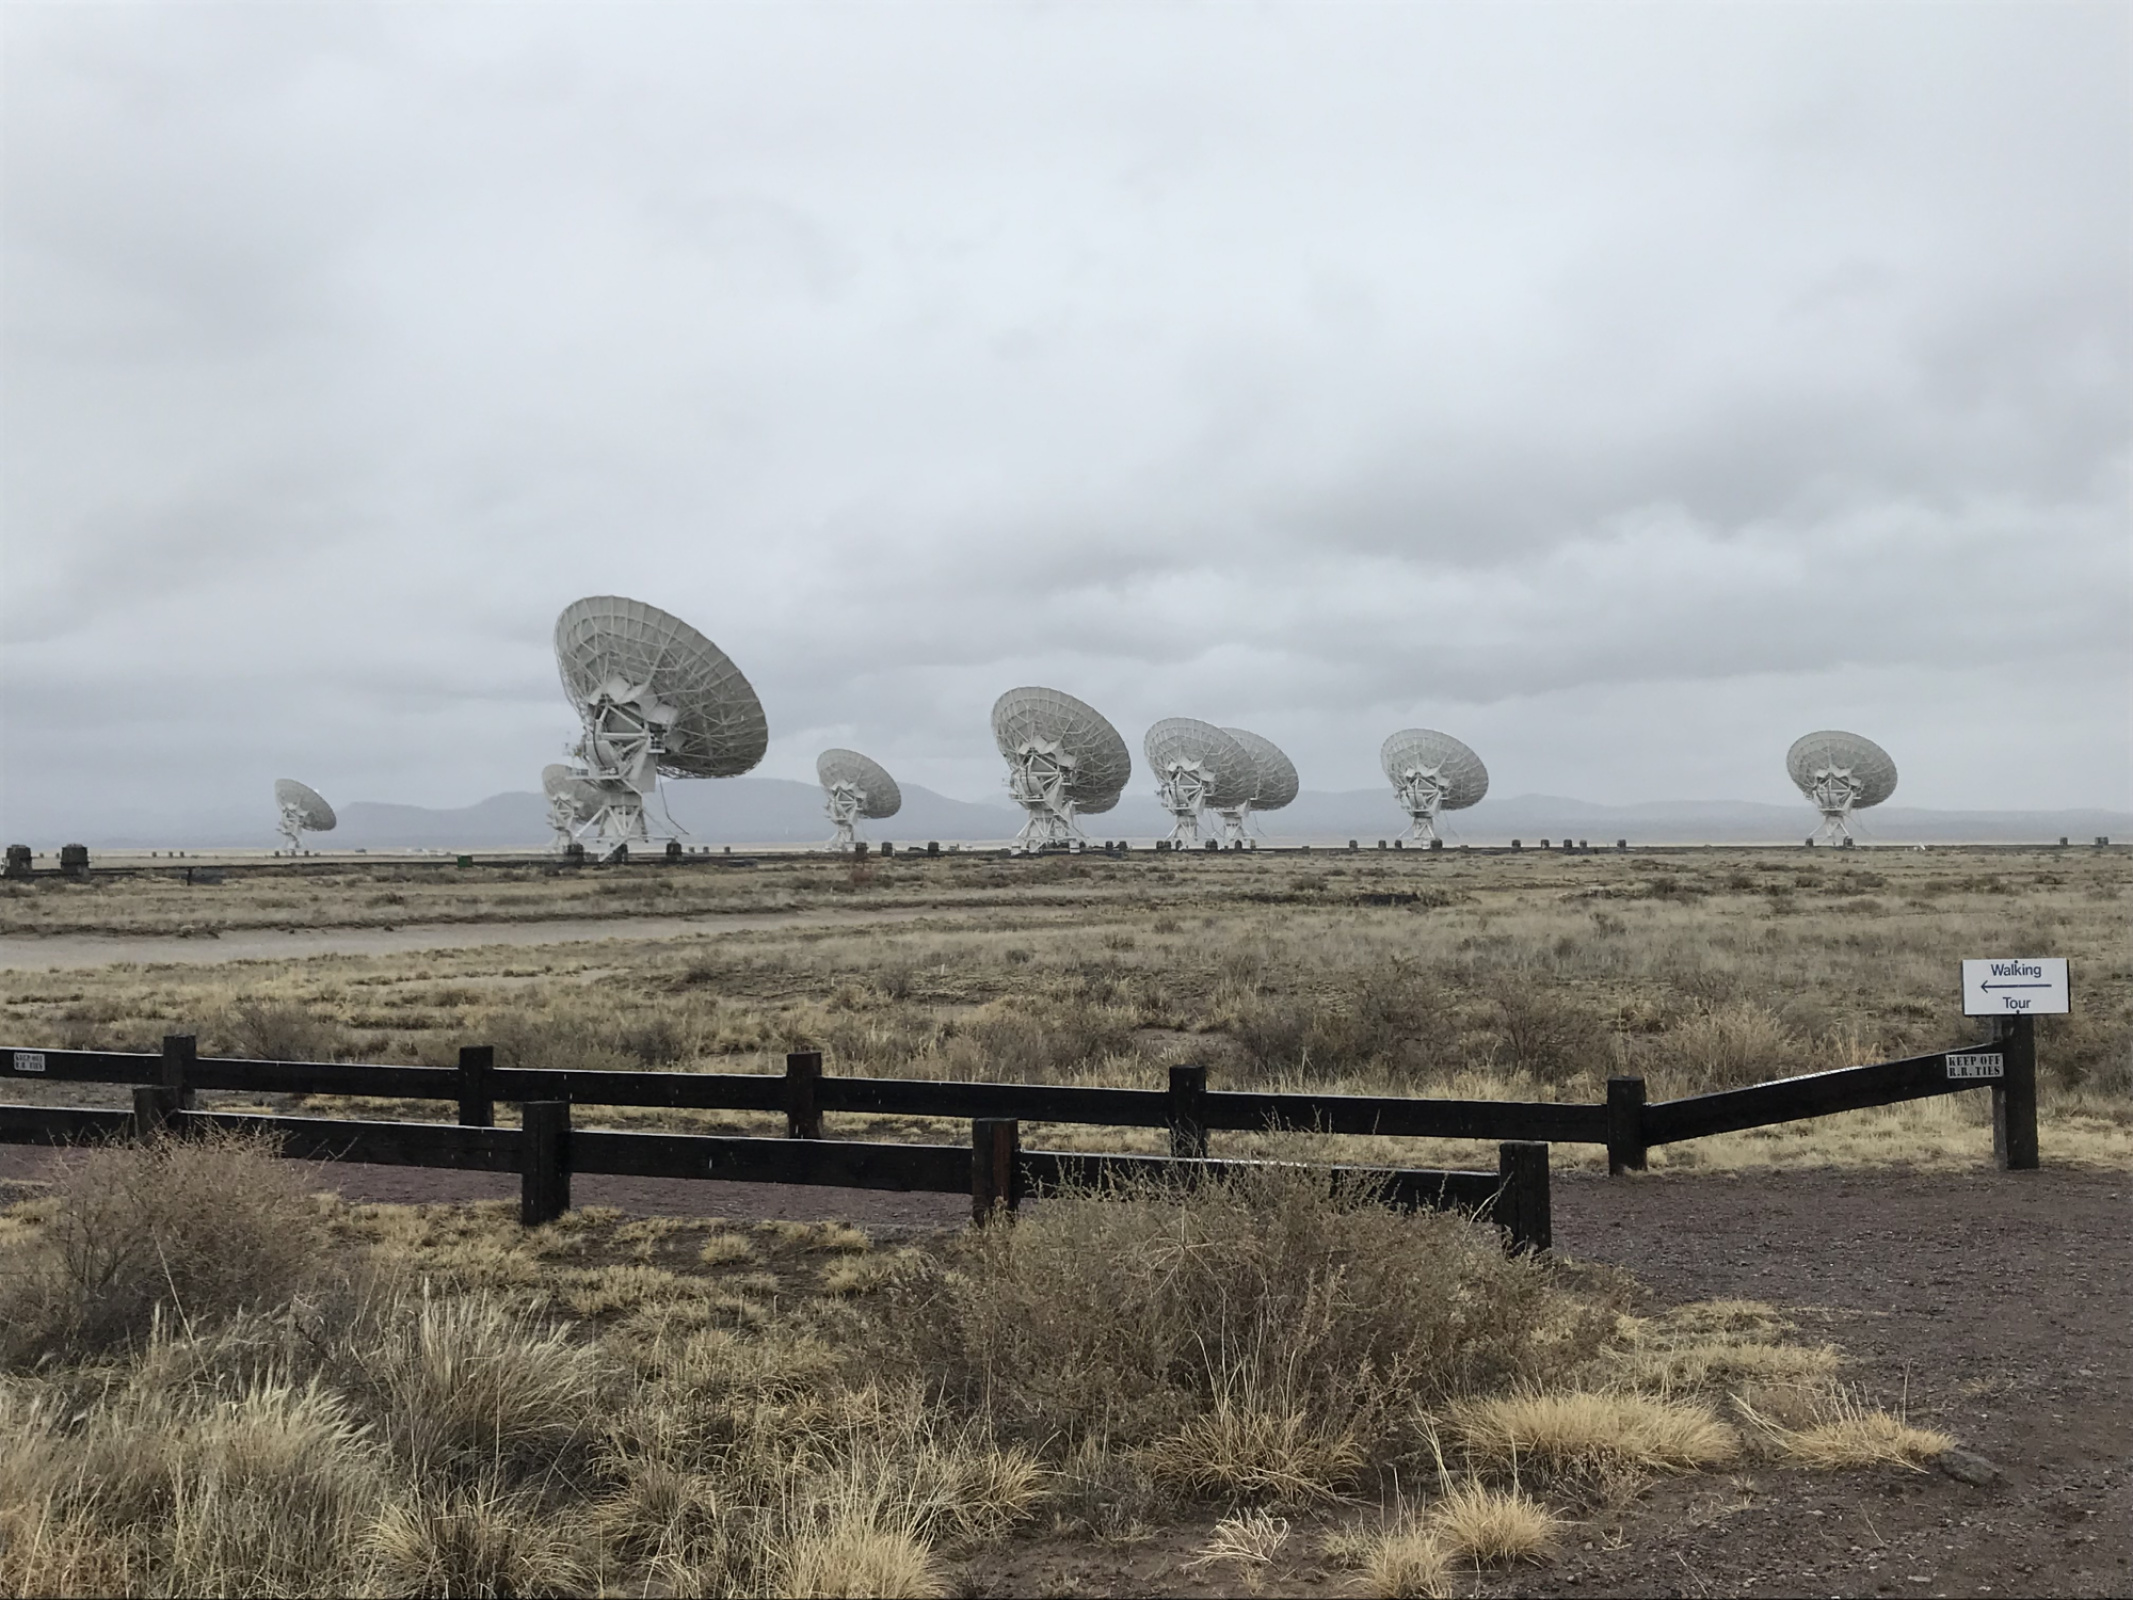 It was always on my bucket list dream to visit the Very Large Array in New Mexico and I did it!